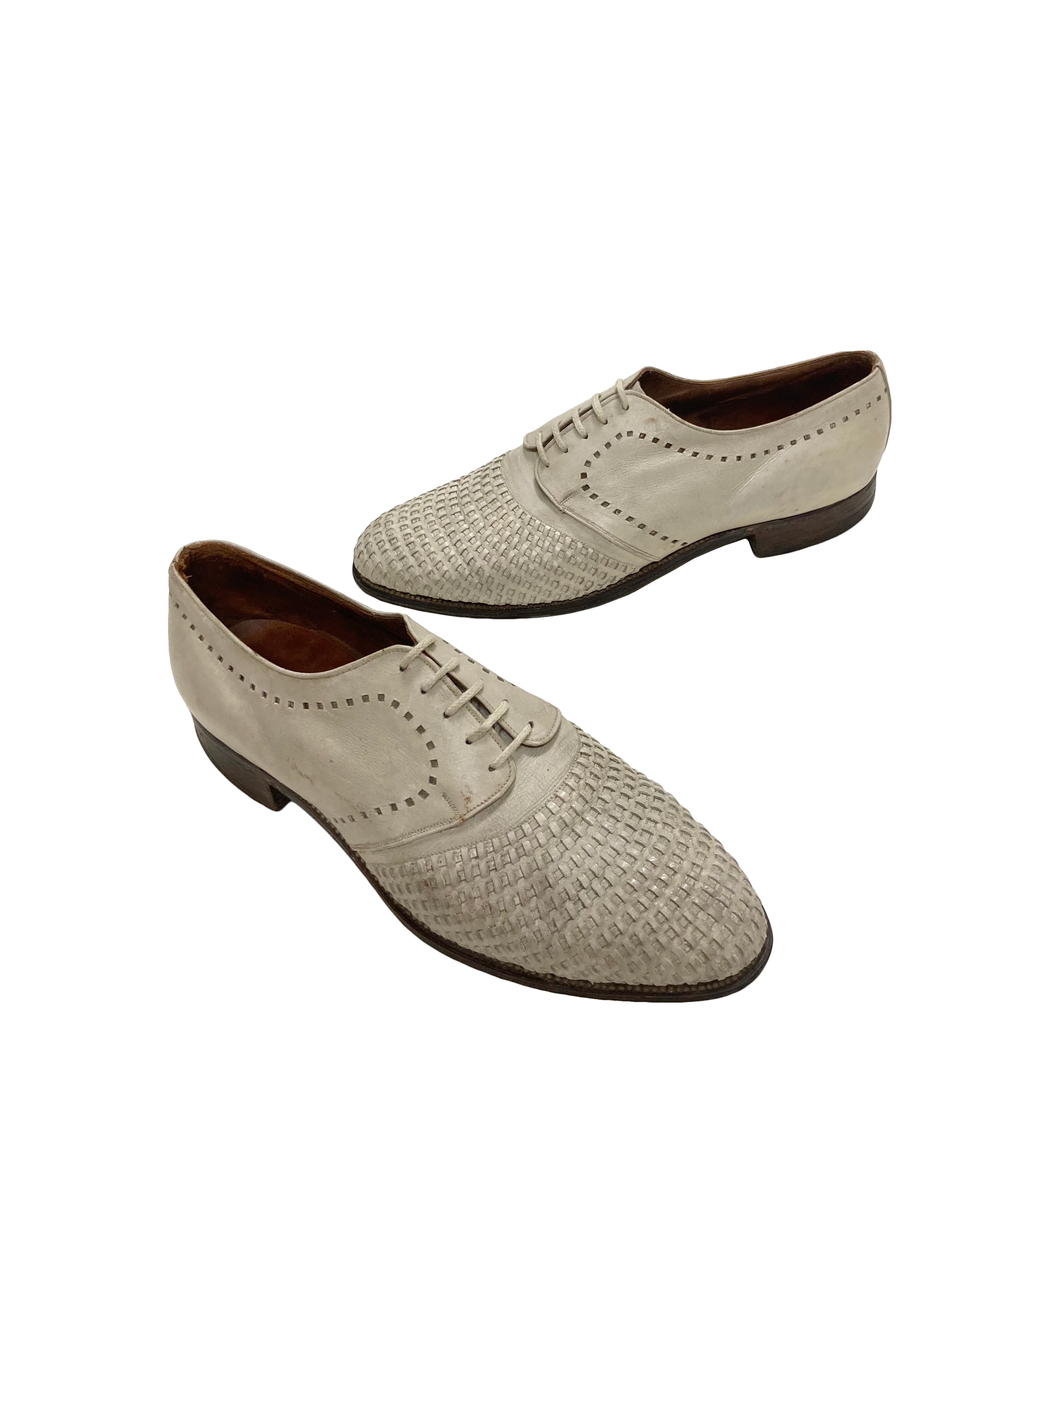 〜60'S WOVEN OXFORD LEATHER SHOES